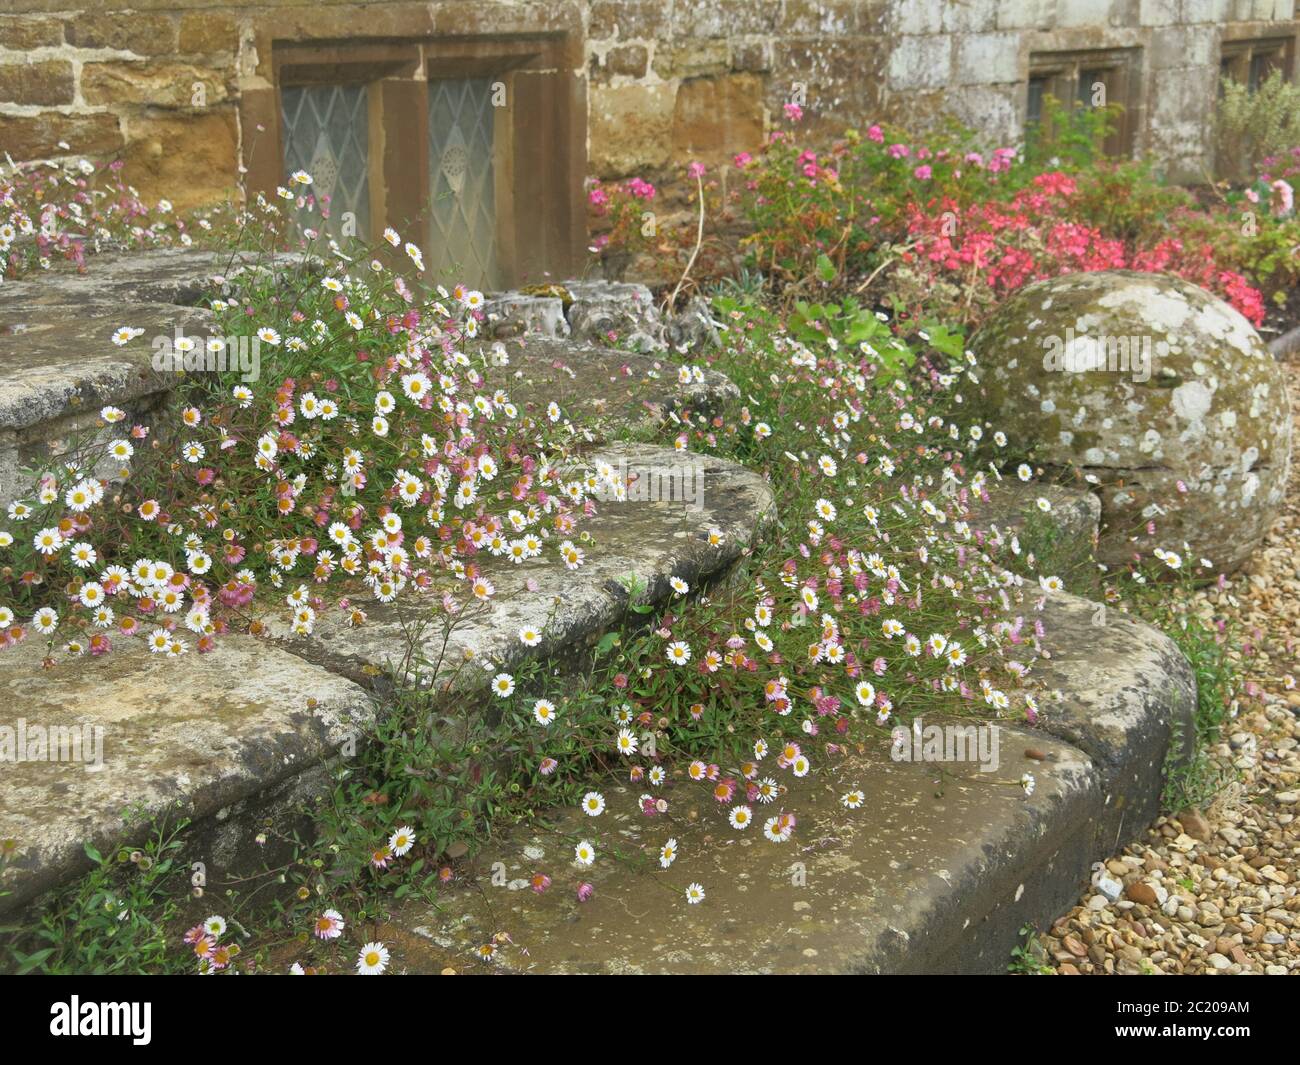 Mexican Fleabane, or Erigeron Karvinskianus, cascades down the stone steps at Canons Ashby and has pretty daisy-like flowers. Stock Photo